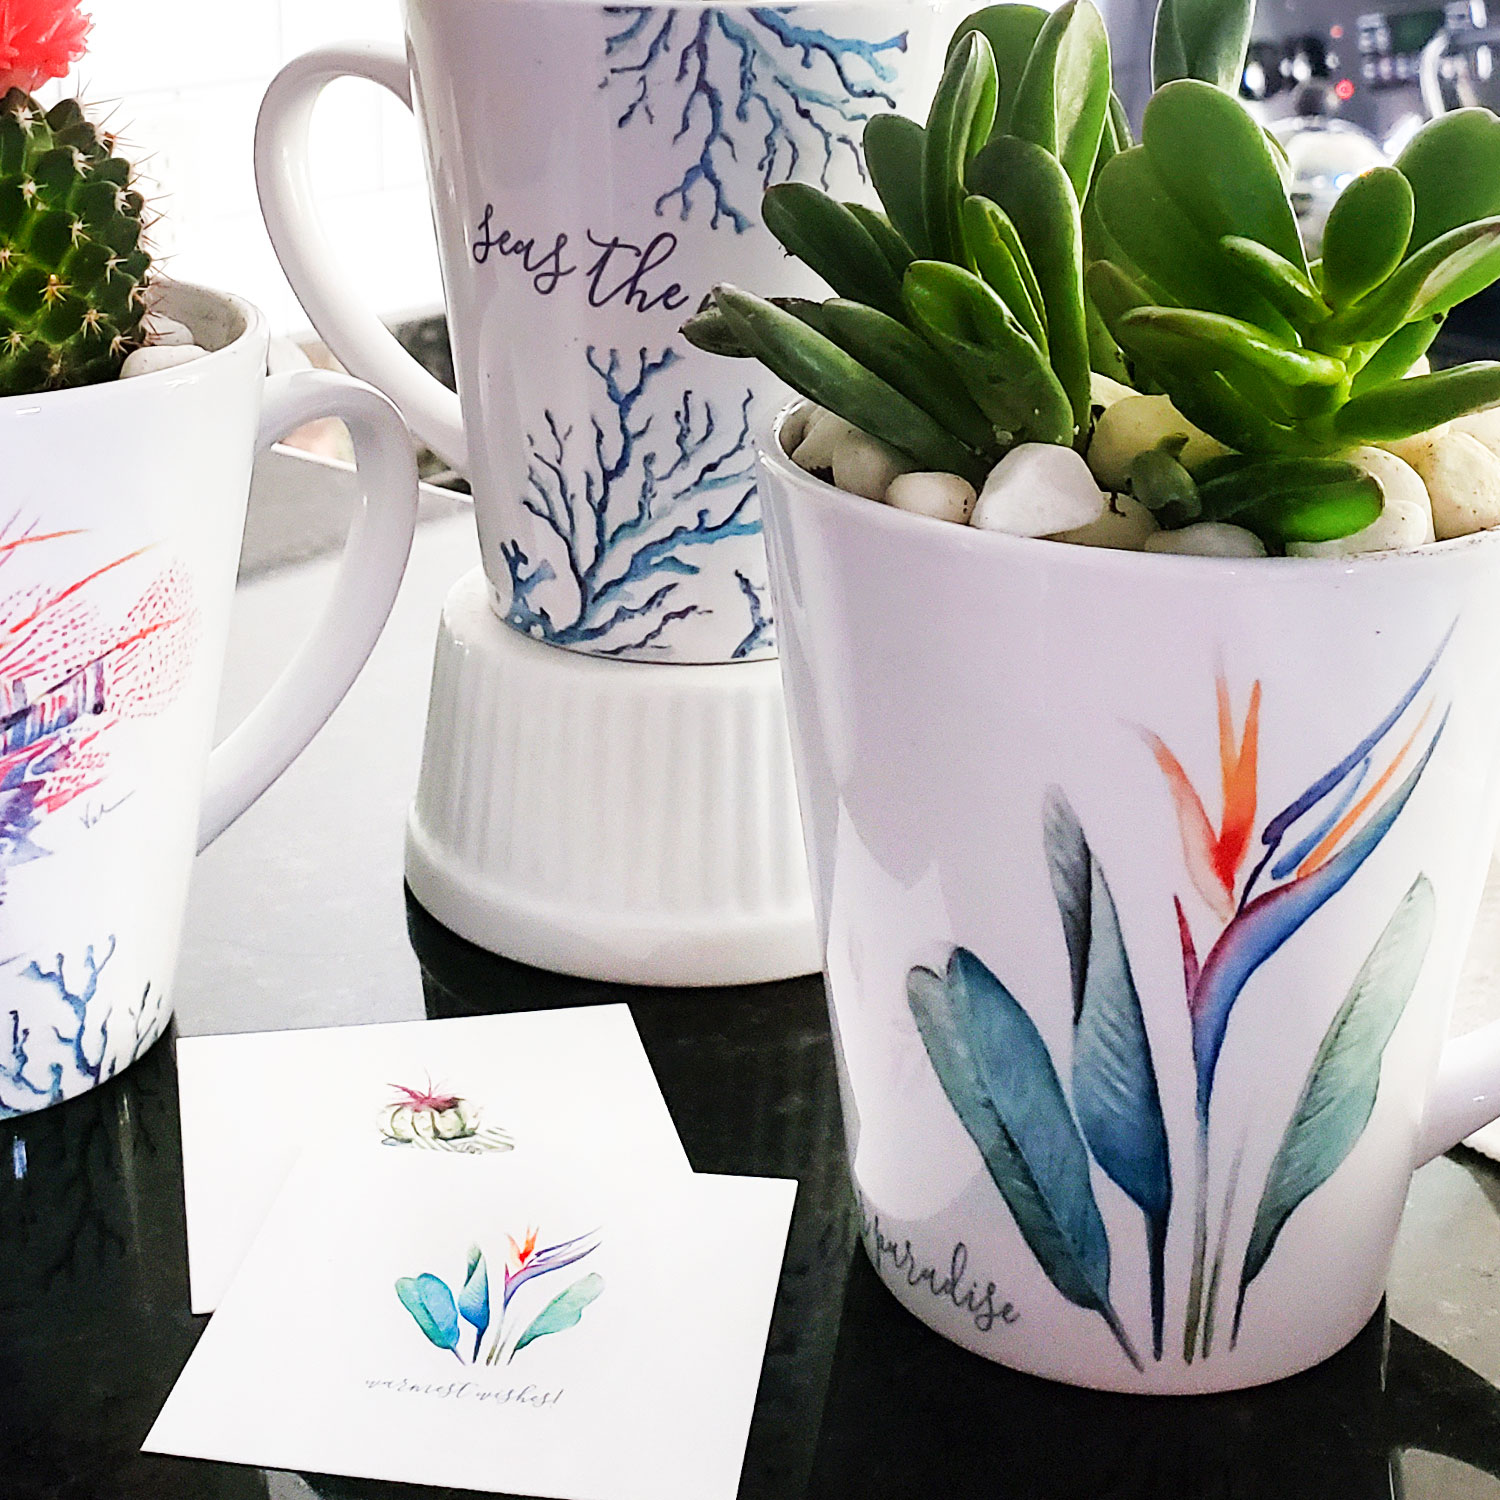 DIY potted succulents and cacti in coffee mugs.